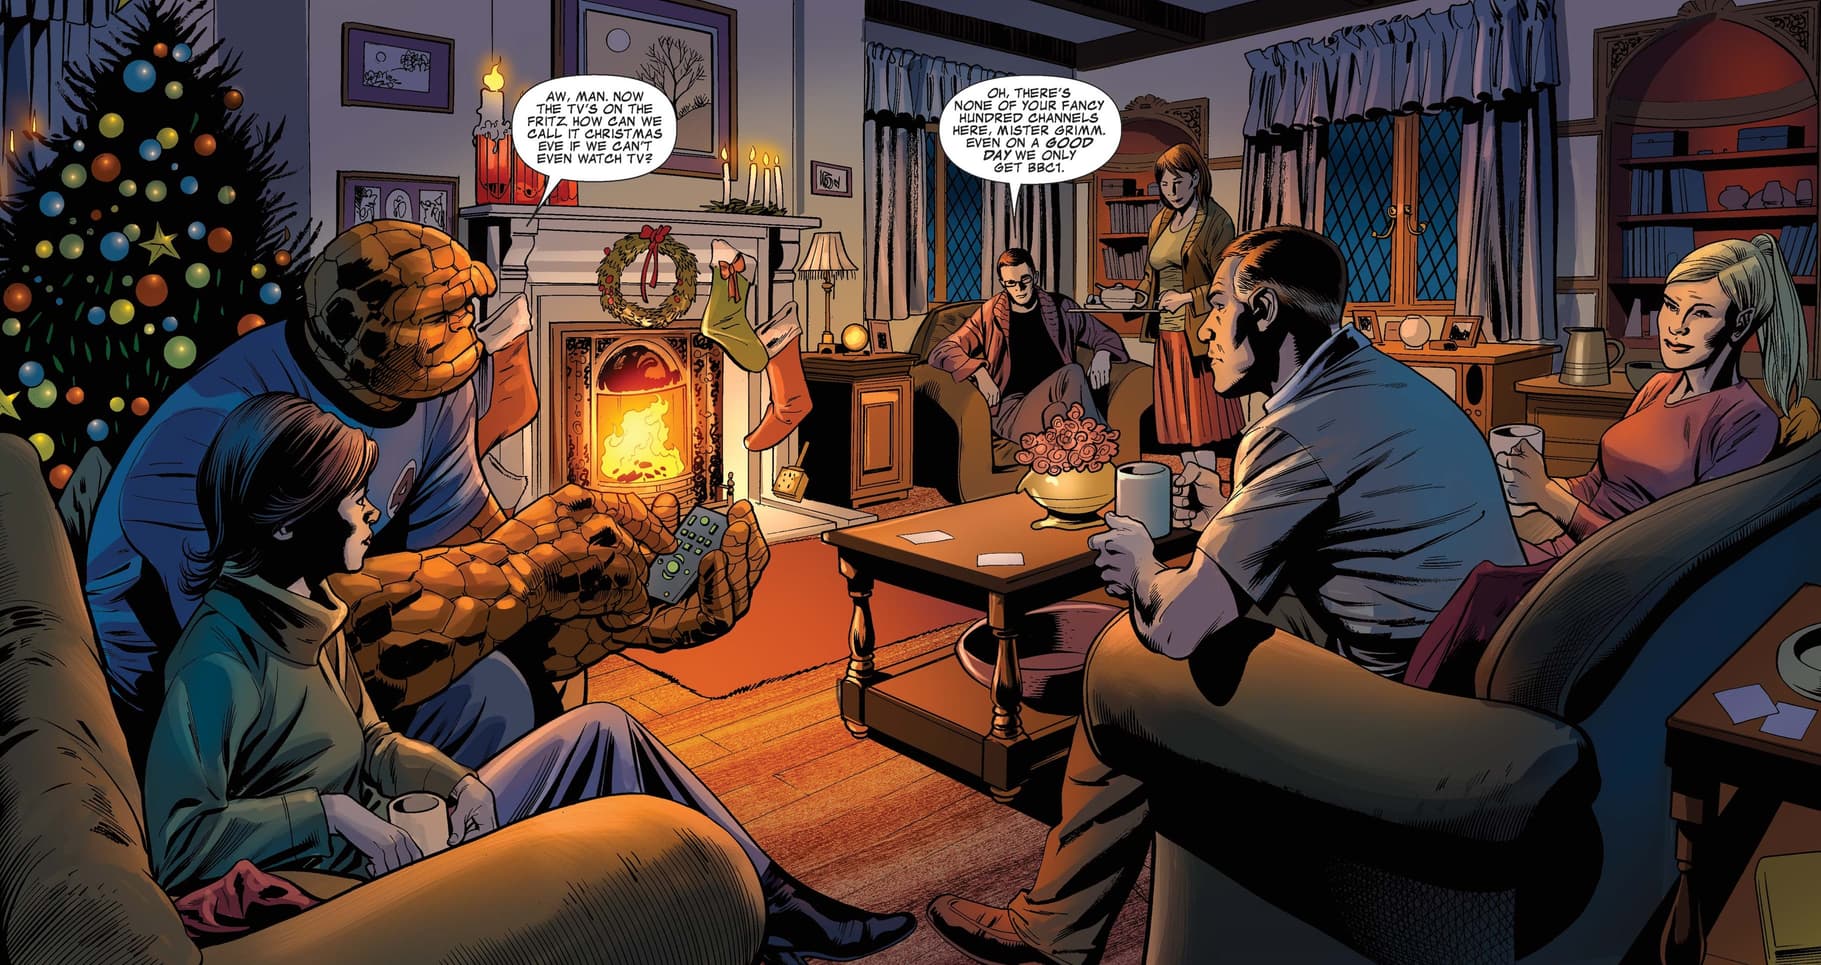 The Fantastic Four gather round the fire in a cozy holiday scene.